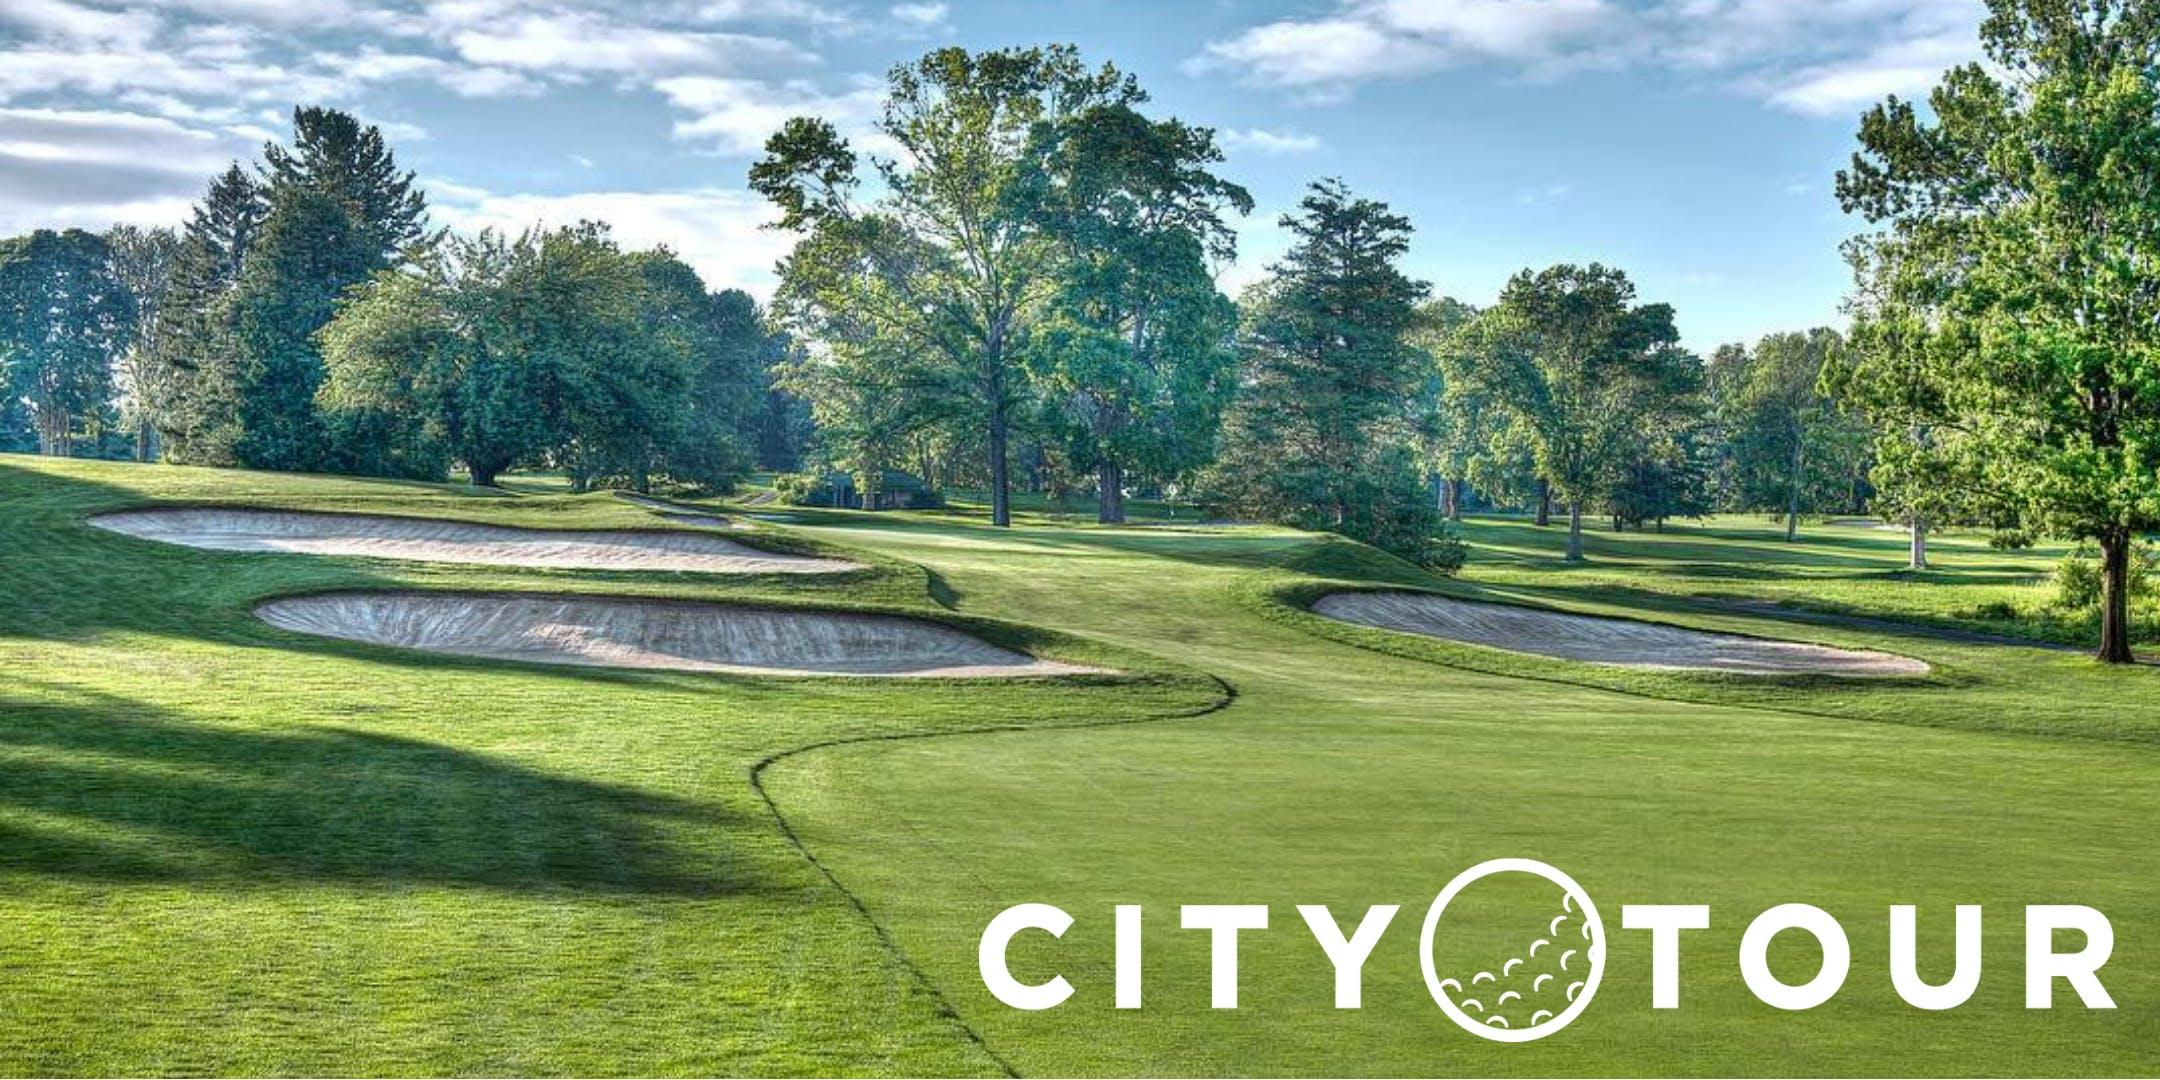 New York City Tour - Muttontown Golf & Country Club